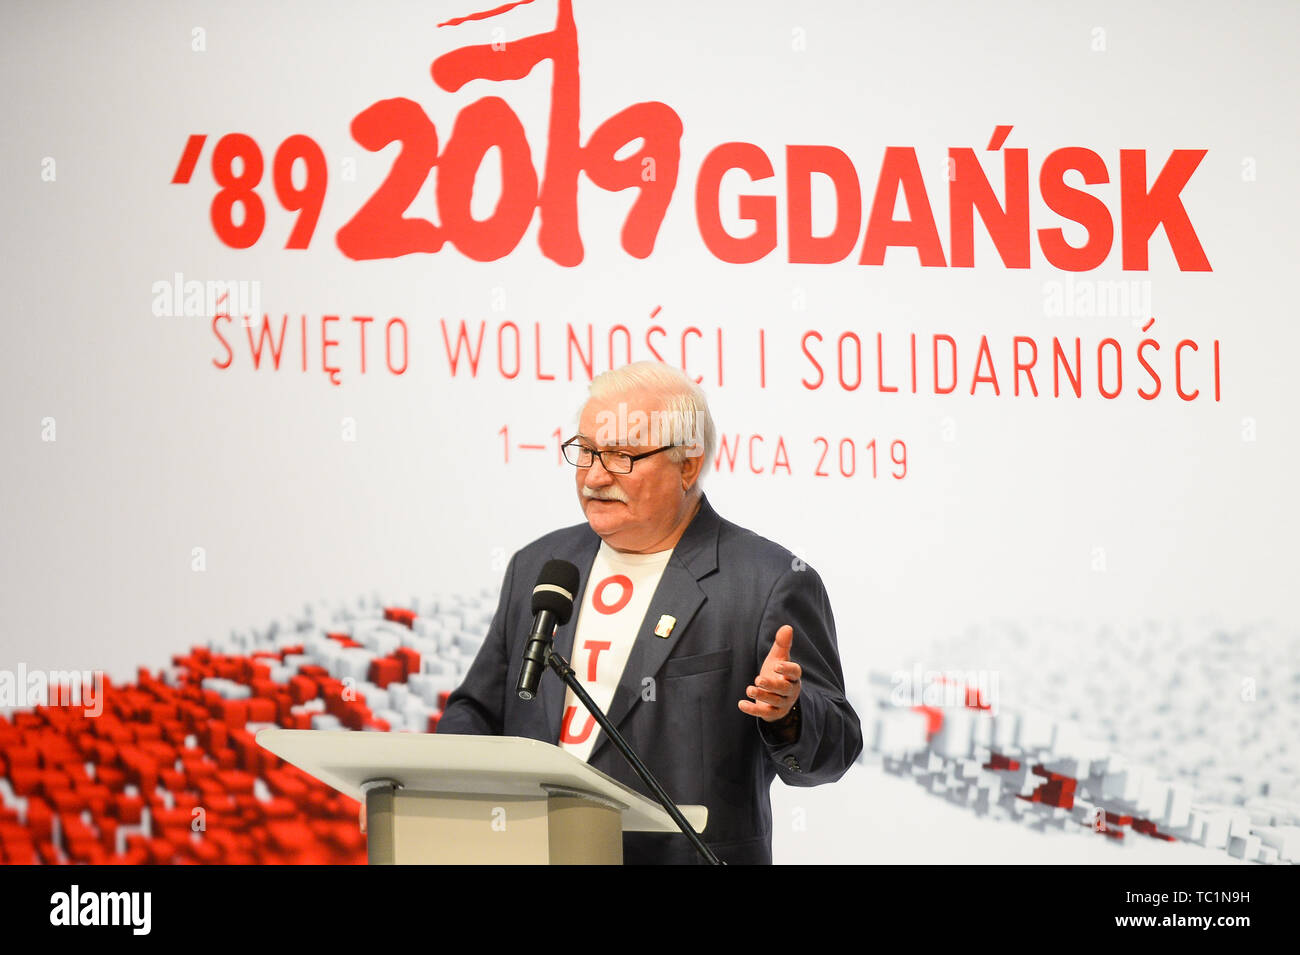 Former President of Poland Lech Walesa speaks about 30 years of Polish democracy on Freedom and Democracy days in Gdansk. Gdansk, in the 1980s became the birthplace of the Solidarity movement, which brought an end to Communism in Poland and played a huge part to end the Soviet Union. On June 04, 1989, the first free elections in the country took place since 1928, and the first since the communist era. Stock Photo